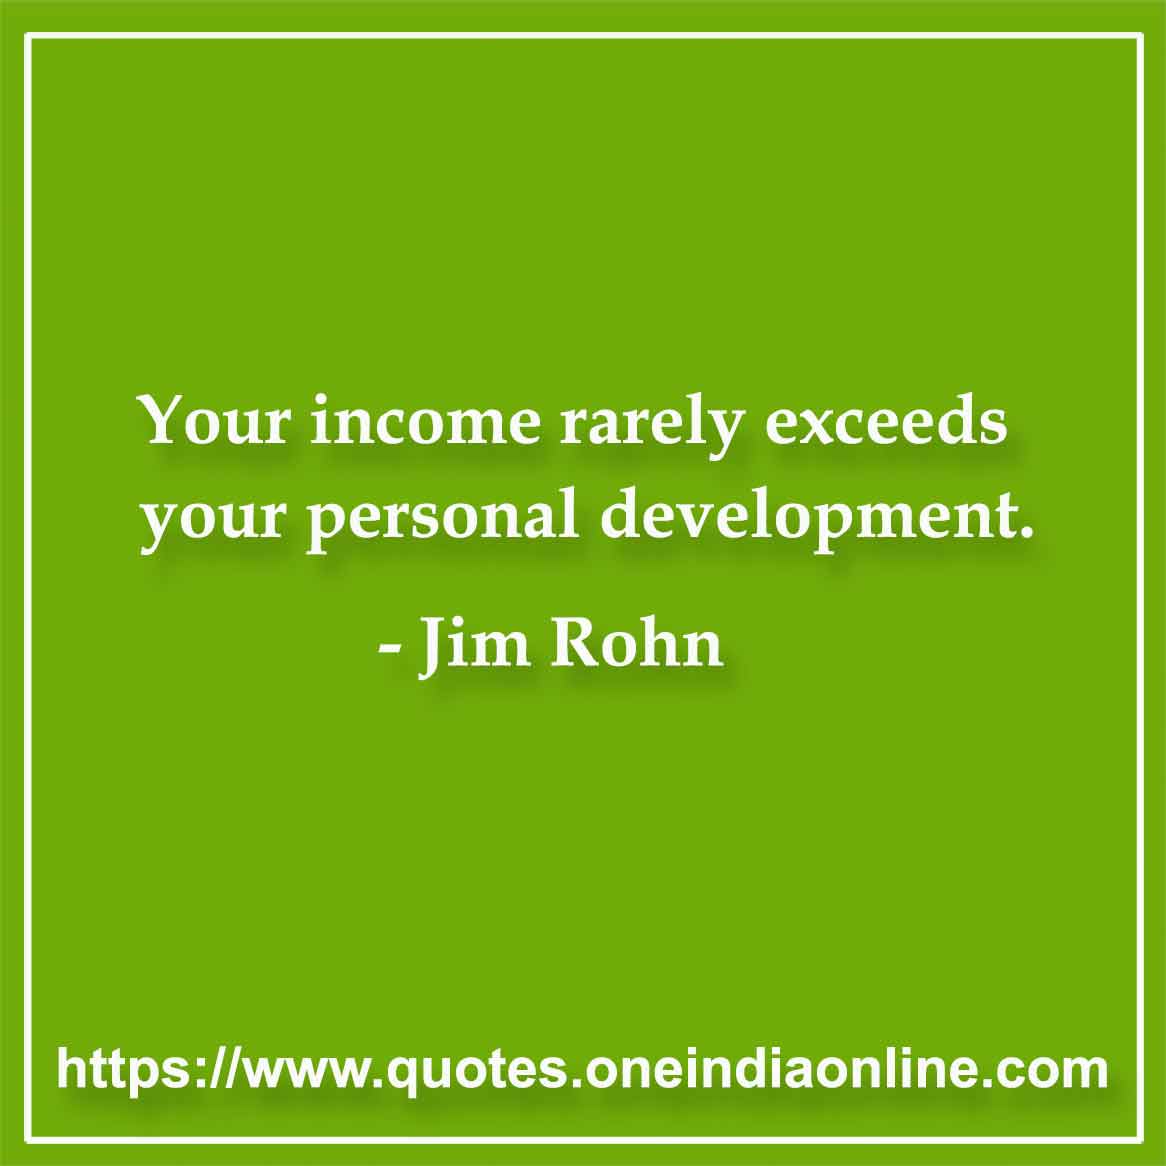 Your income rarely exceeds your personal development.

-by Jim Rohn